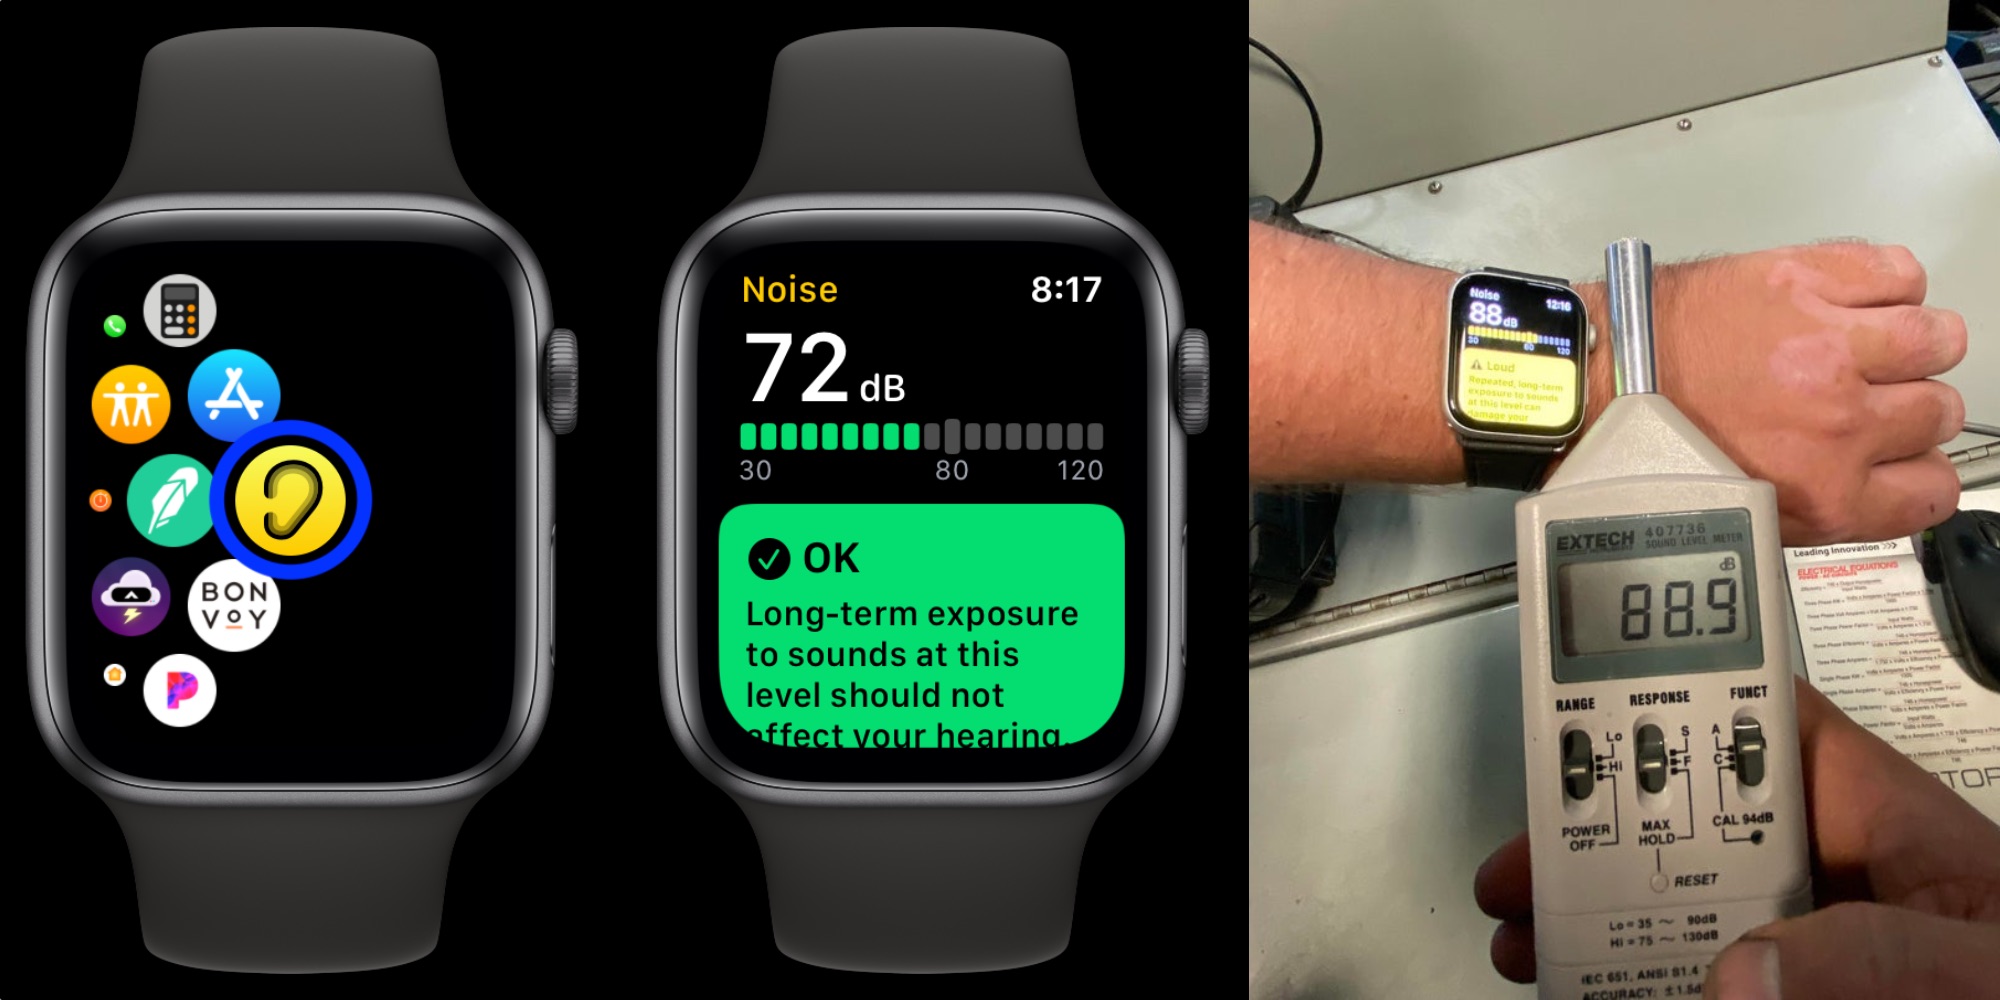 langs Verdraaiing Mededogen How accurate is Apple Watch noise level detection for hearing health? -  9to5Mac